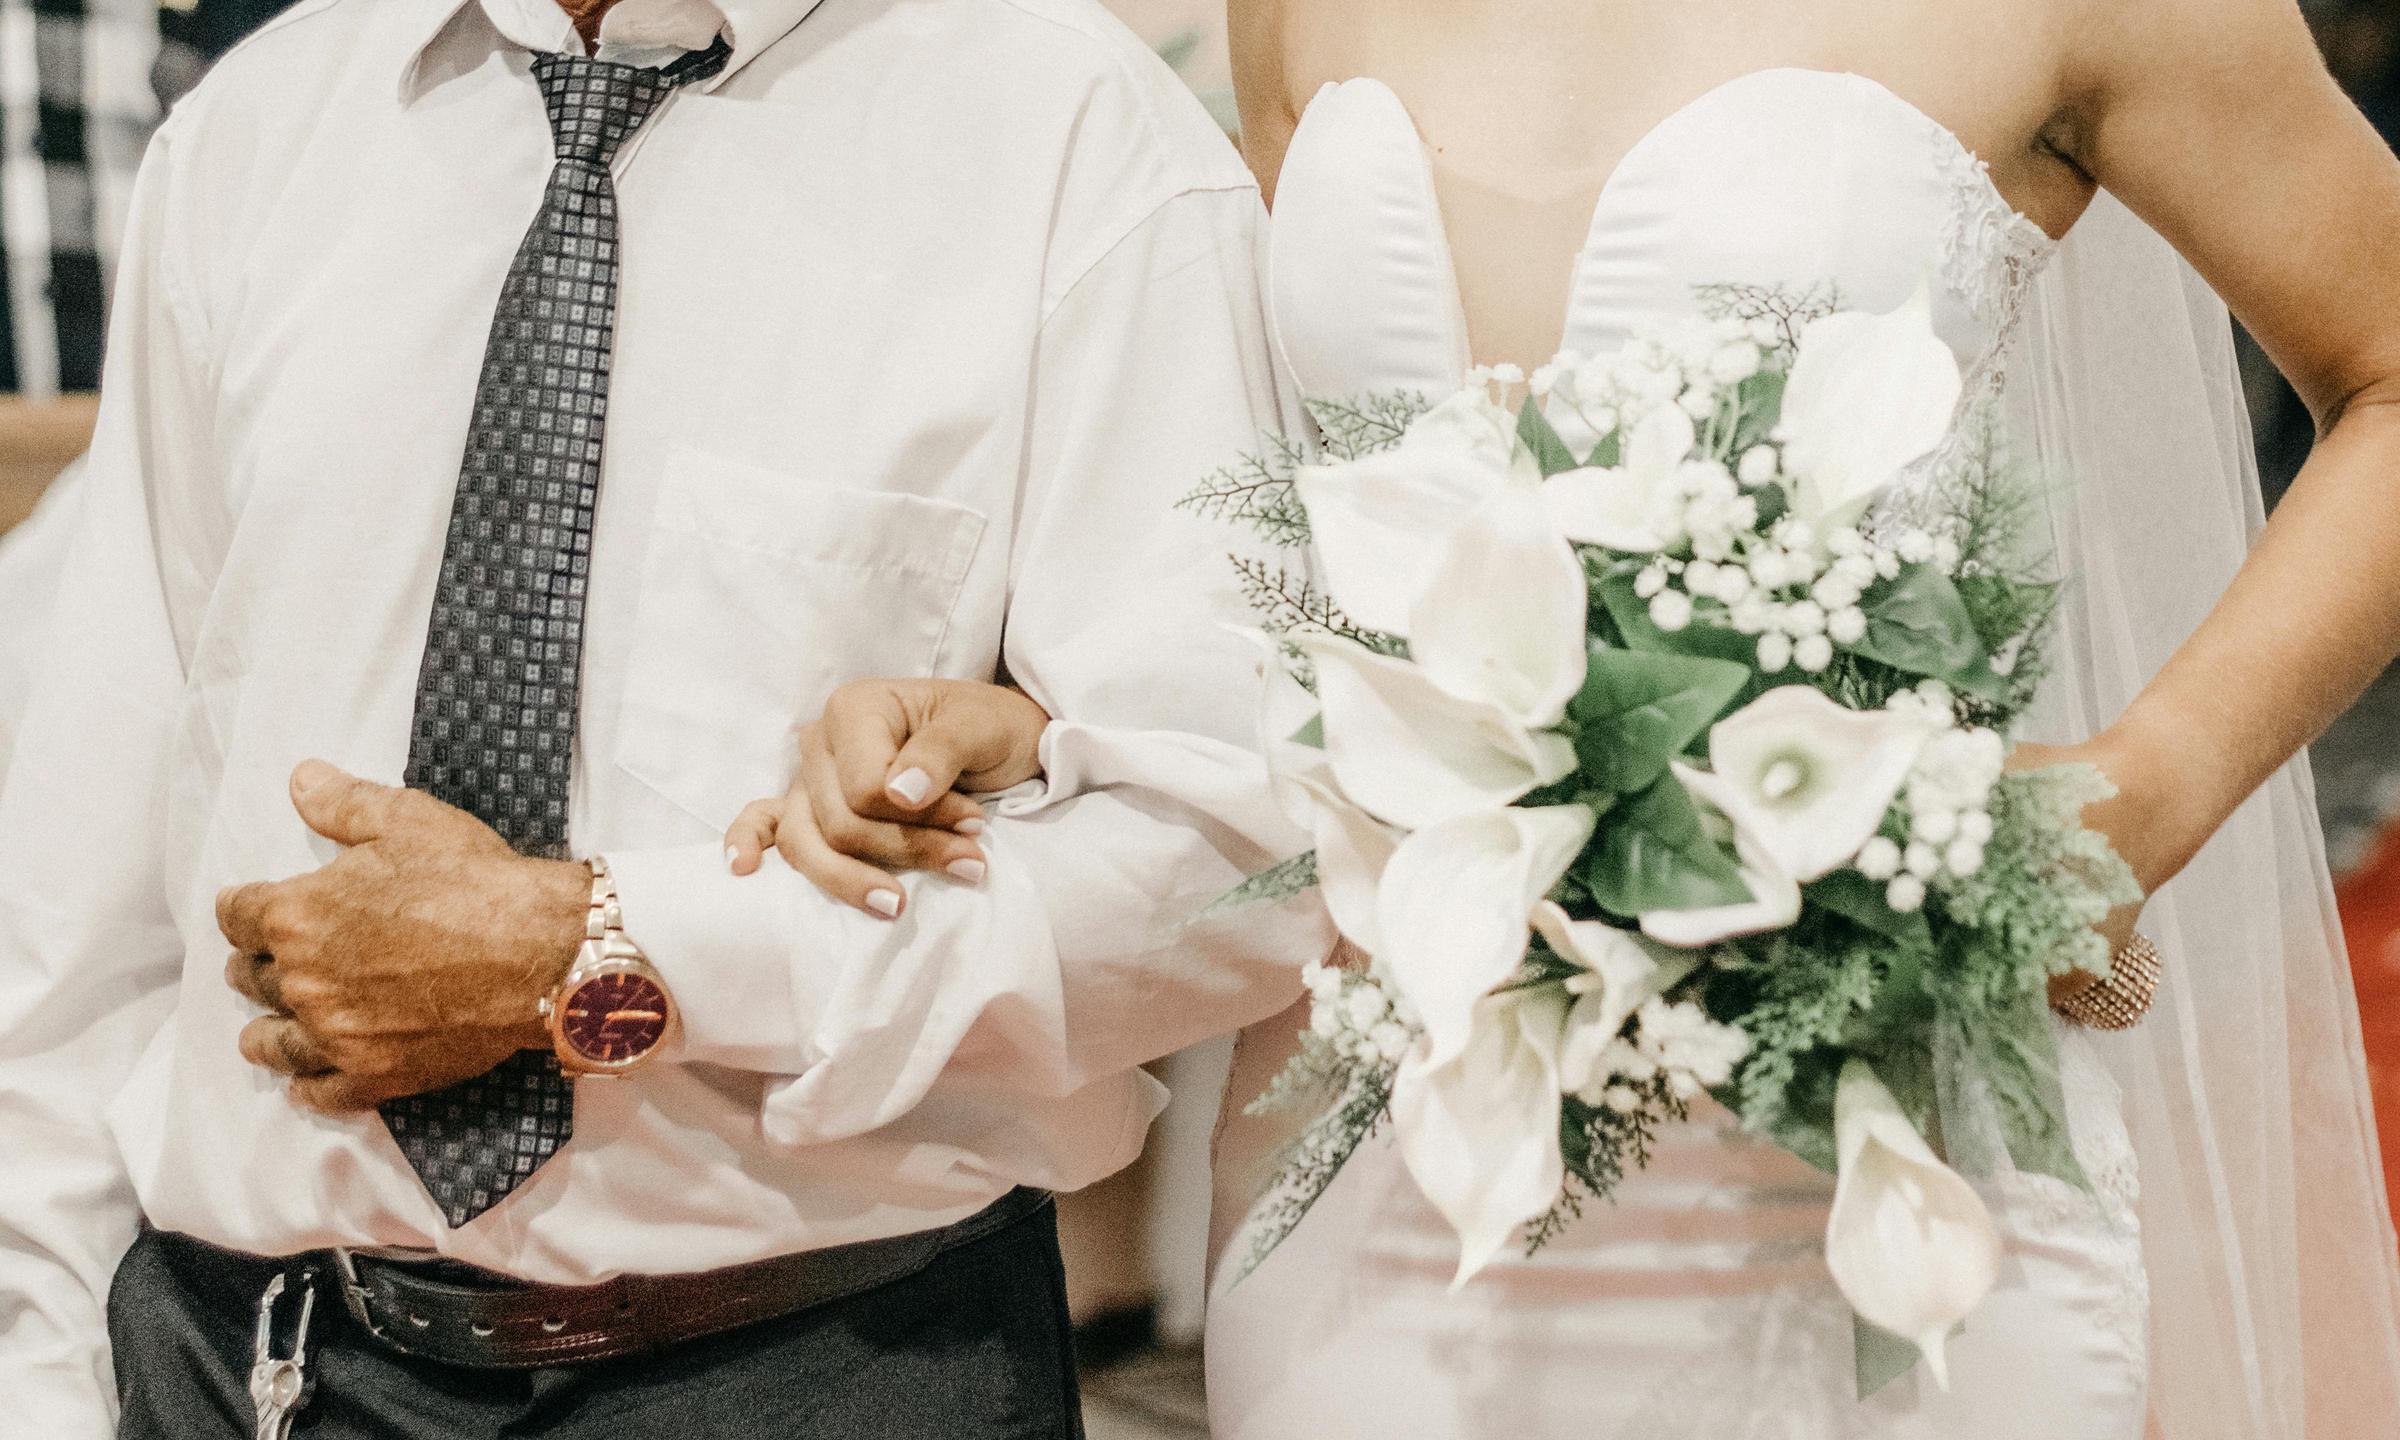 A father walking a bride down the aisle | Source: Pexels